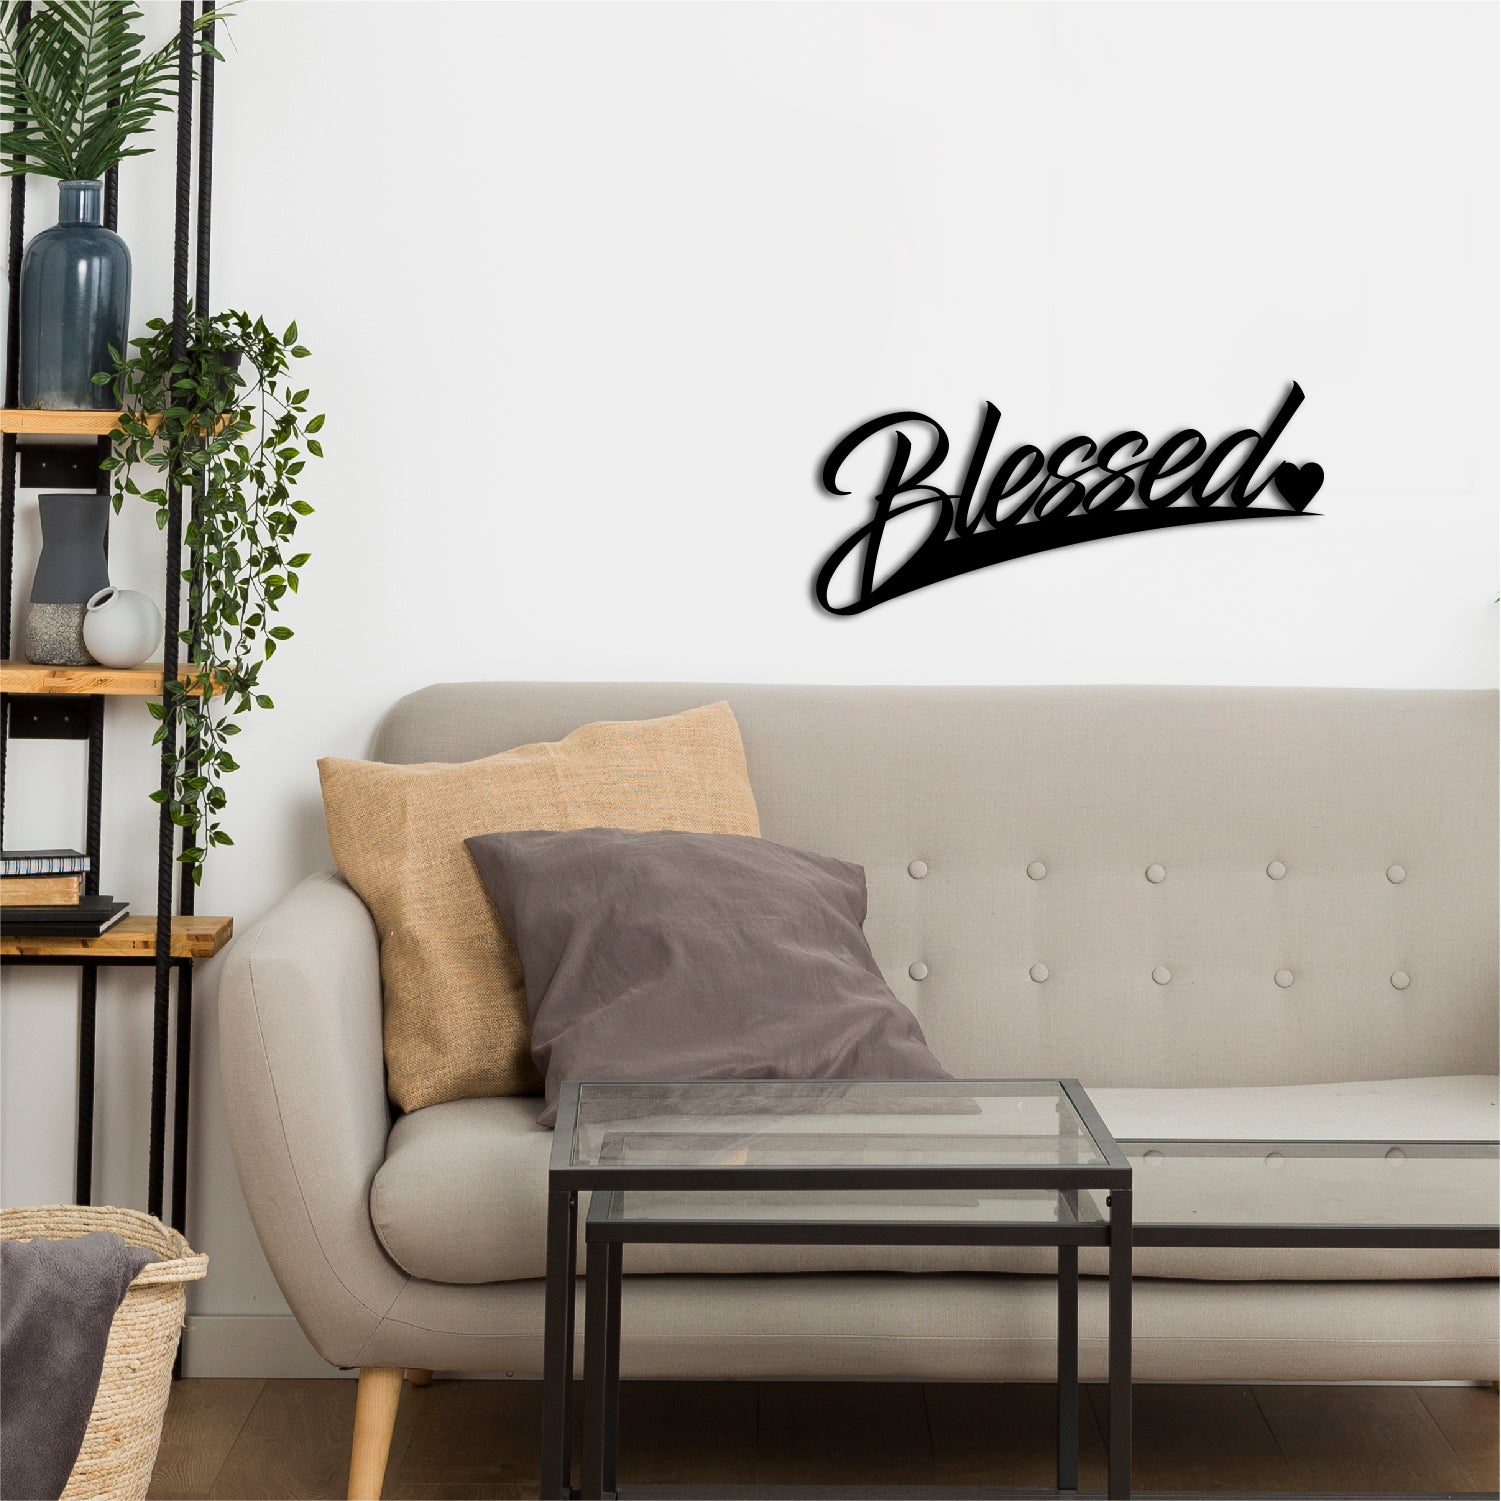 Blessed Black Engineered Wood Wall Art Cutout, Ready To Hang Home Decor 4